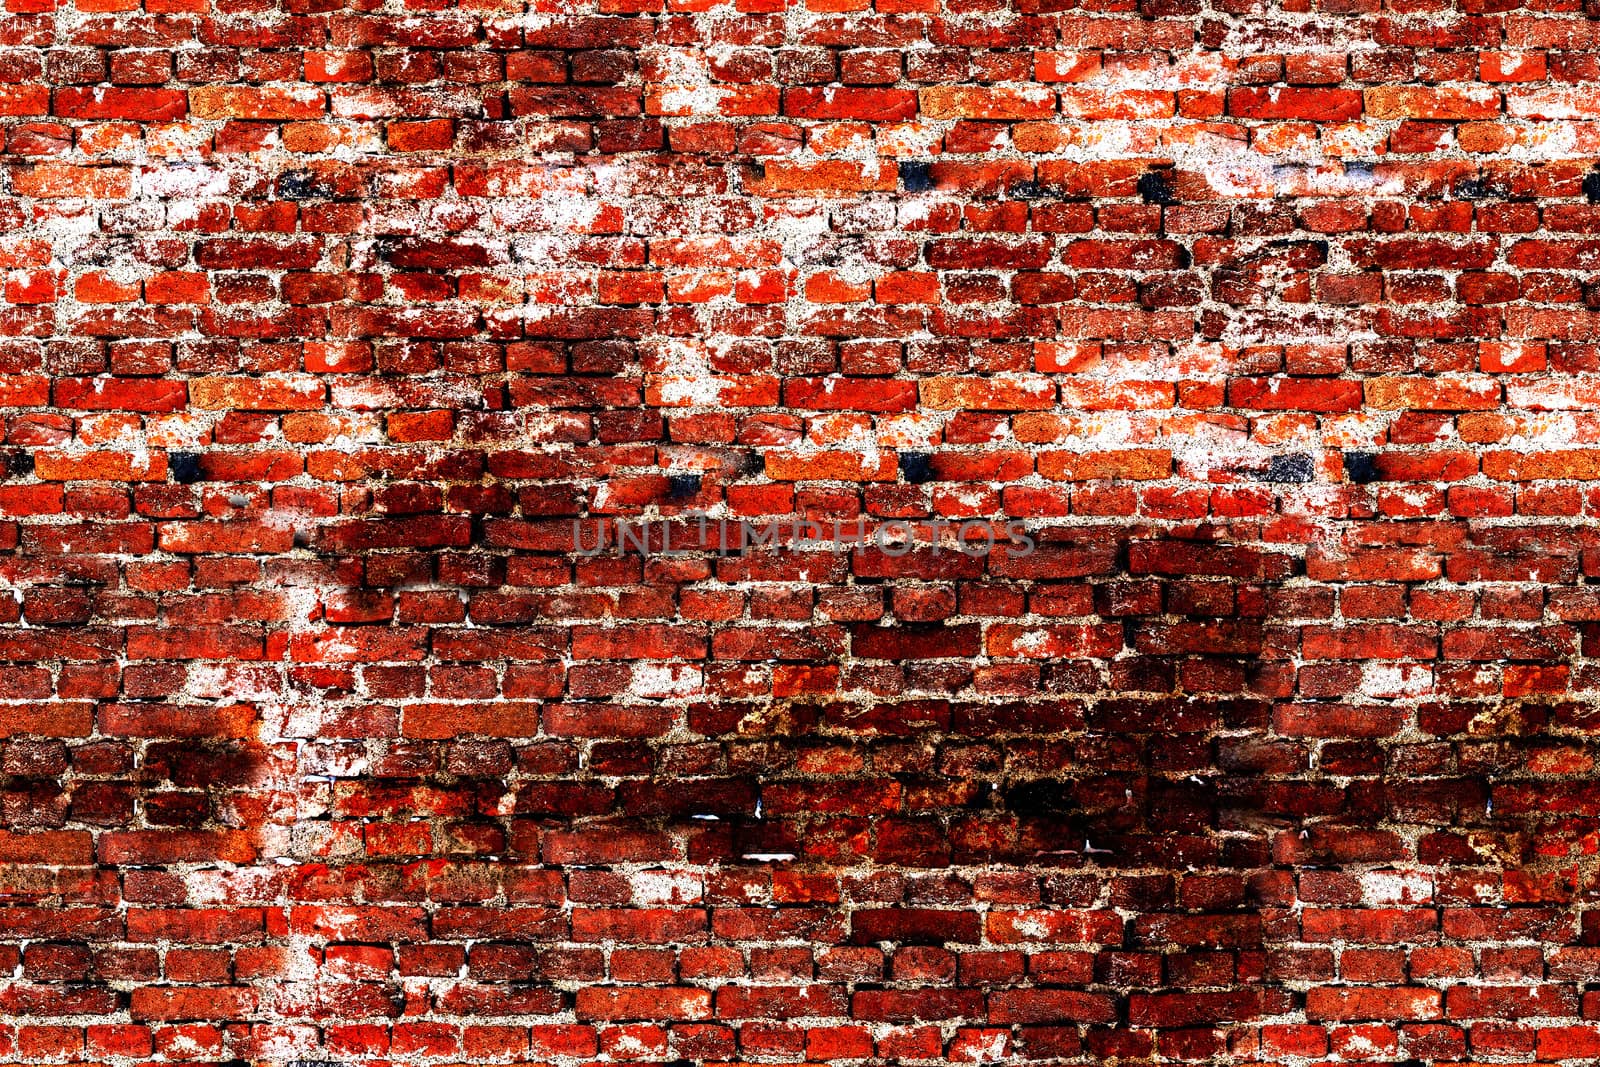 The surface of the brick from the background wall by photomtheart